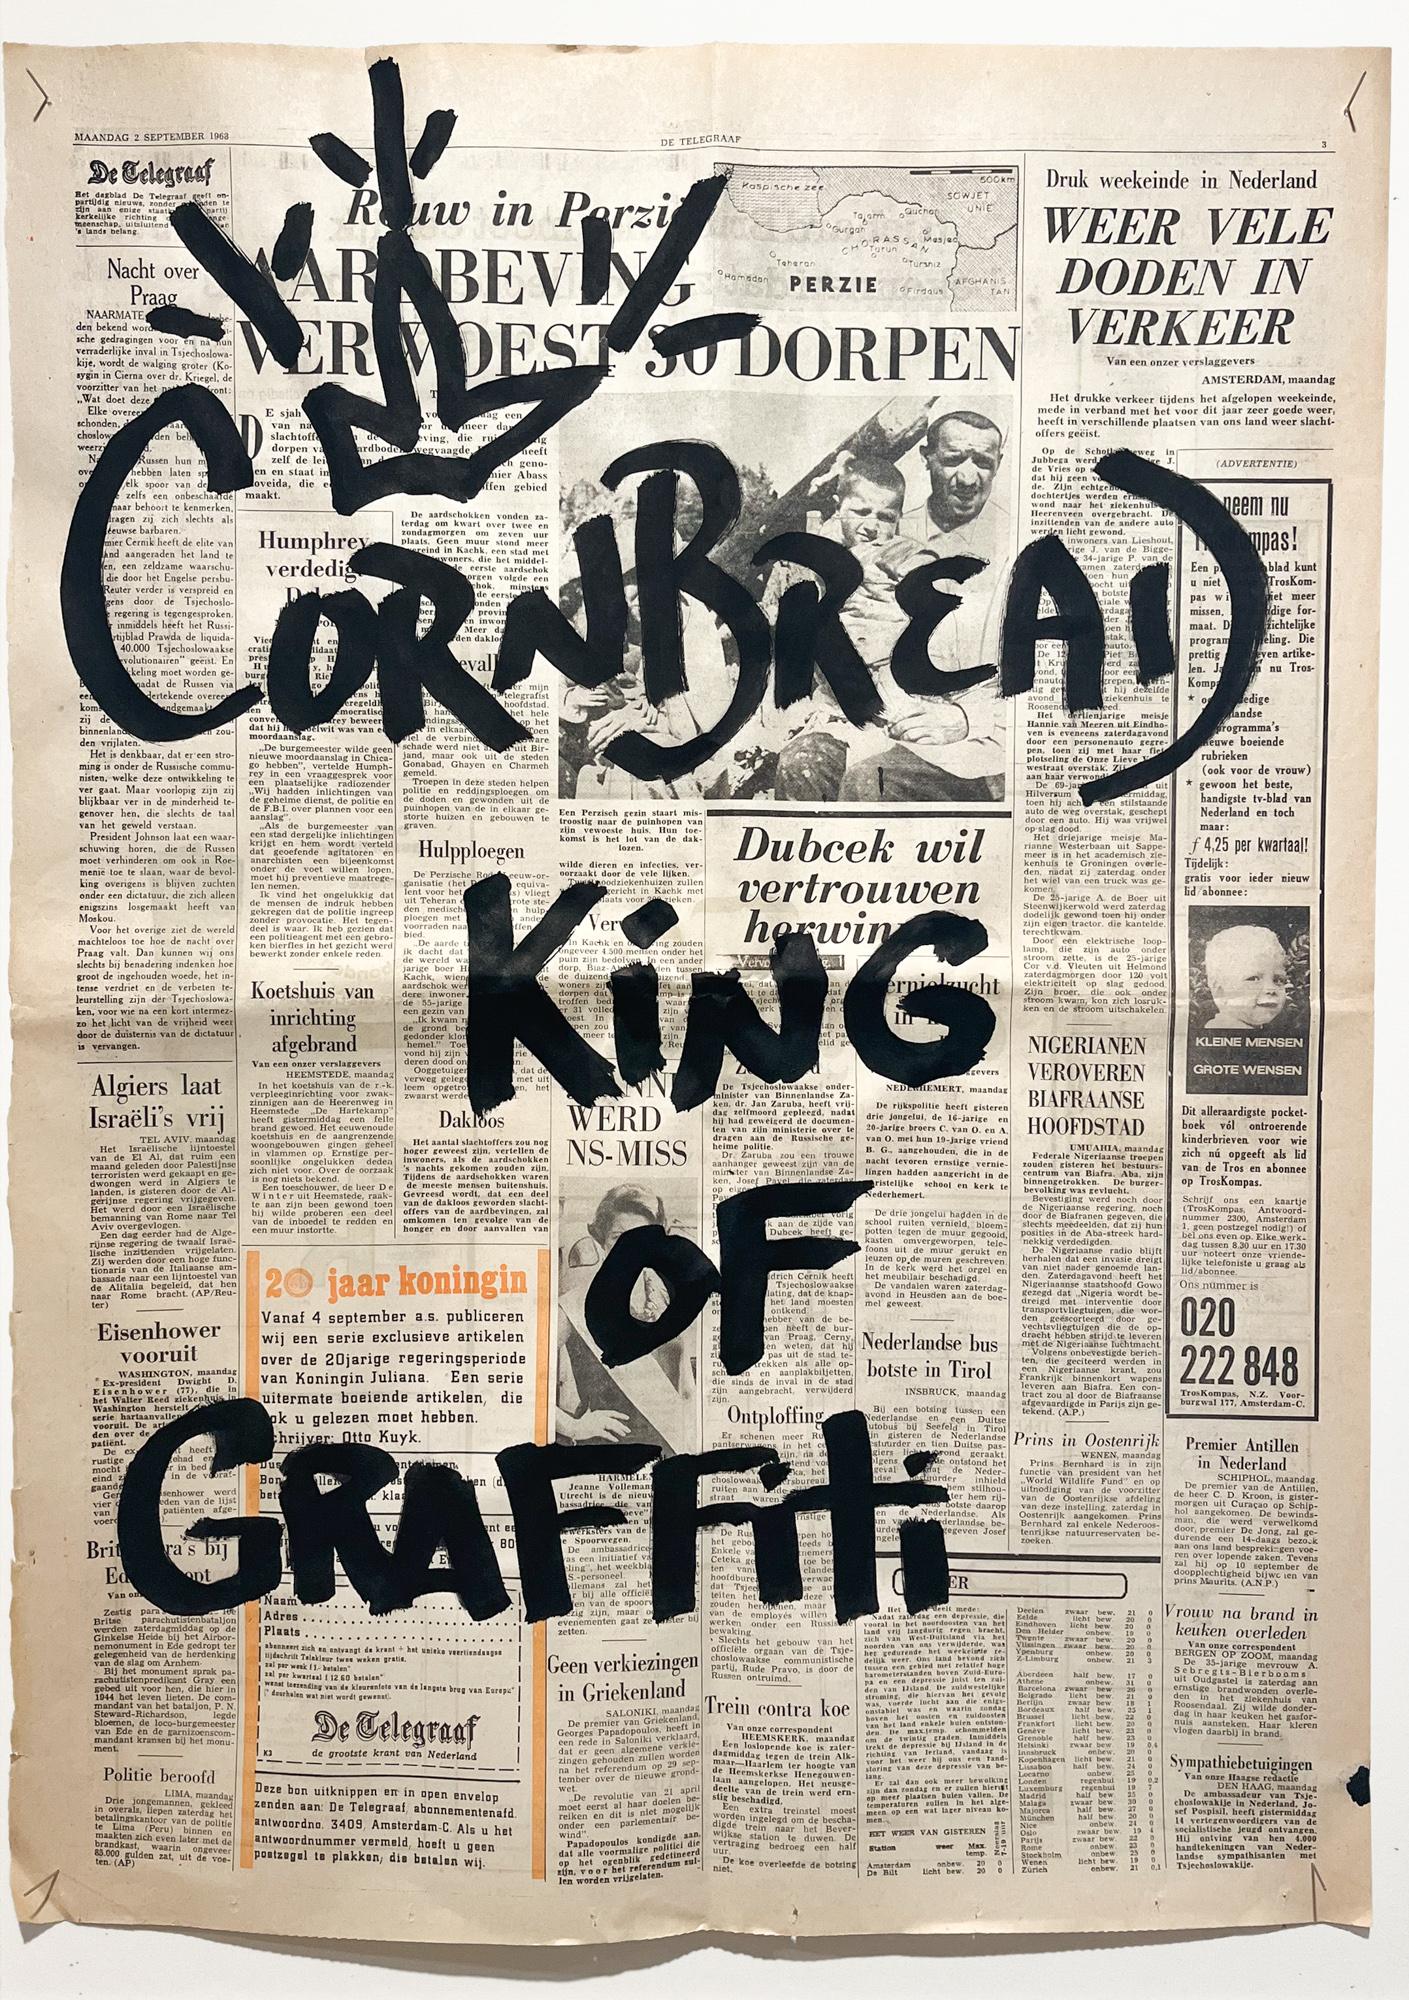 This artwork titled "Cornbread Tags De Telegraaf: The King Of Graffiti #2" is an original artwork by Cornbread made of acrylic paint on newspaper. The piece measures 58cm x 41cm / 22.75in x 16in approx. unframed. 

Darryl McCray, known by his